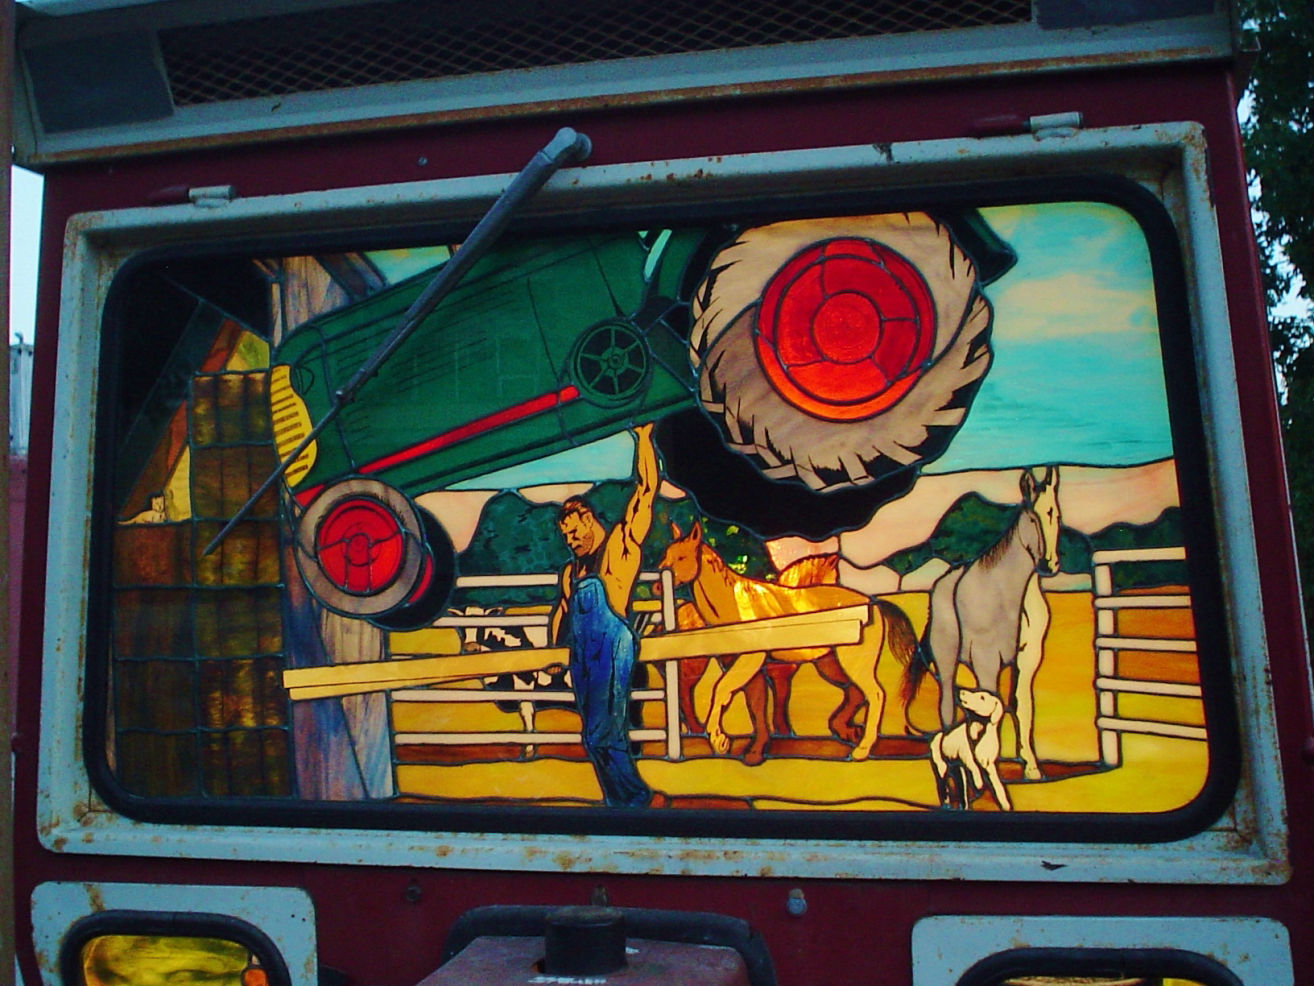 Near-Mint Condition stained glass tractor by Karl Unnasch: The "Clark Kent" panel